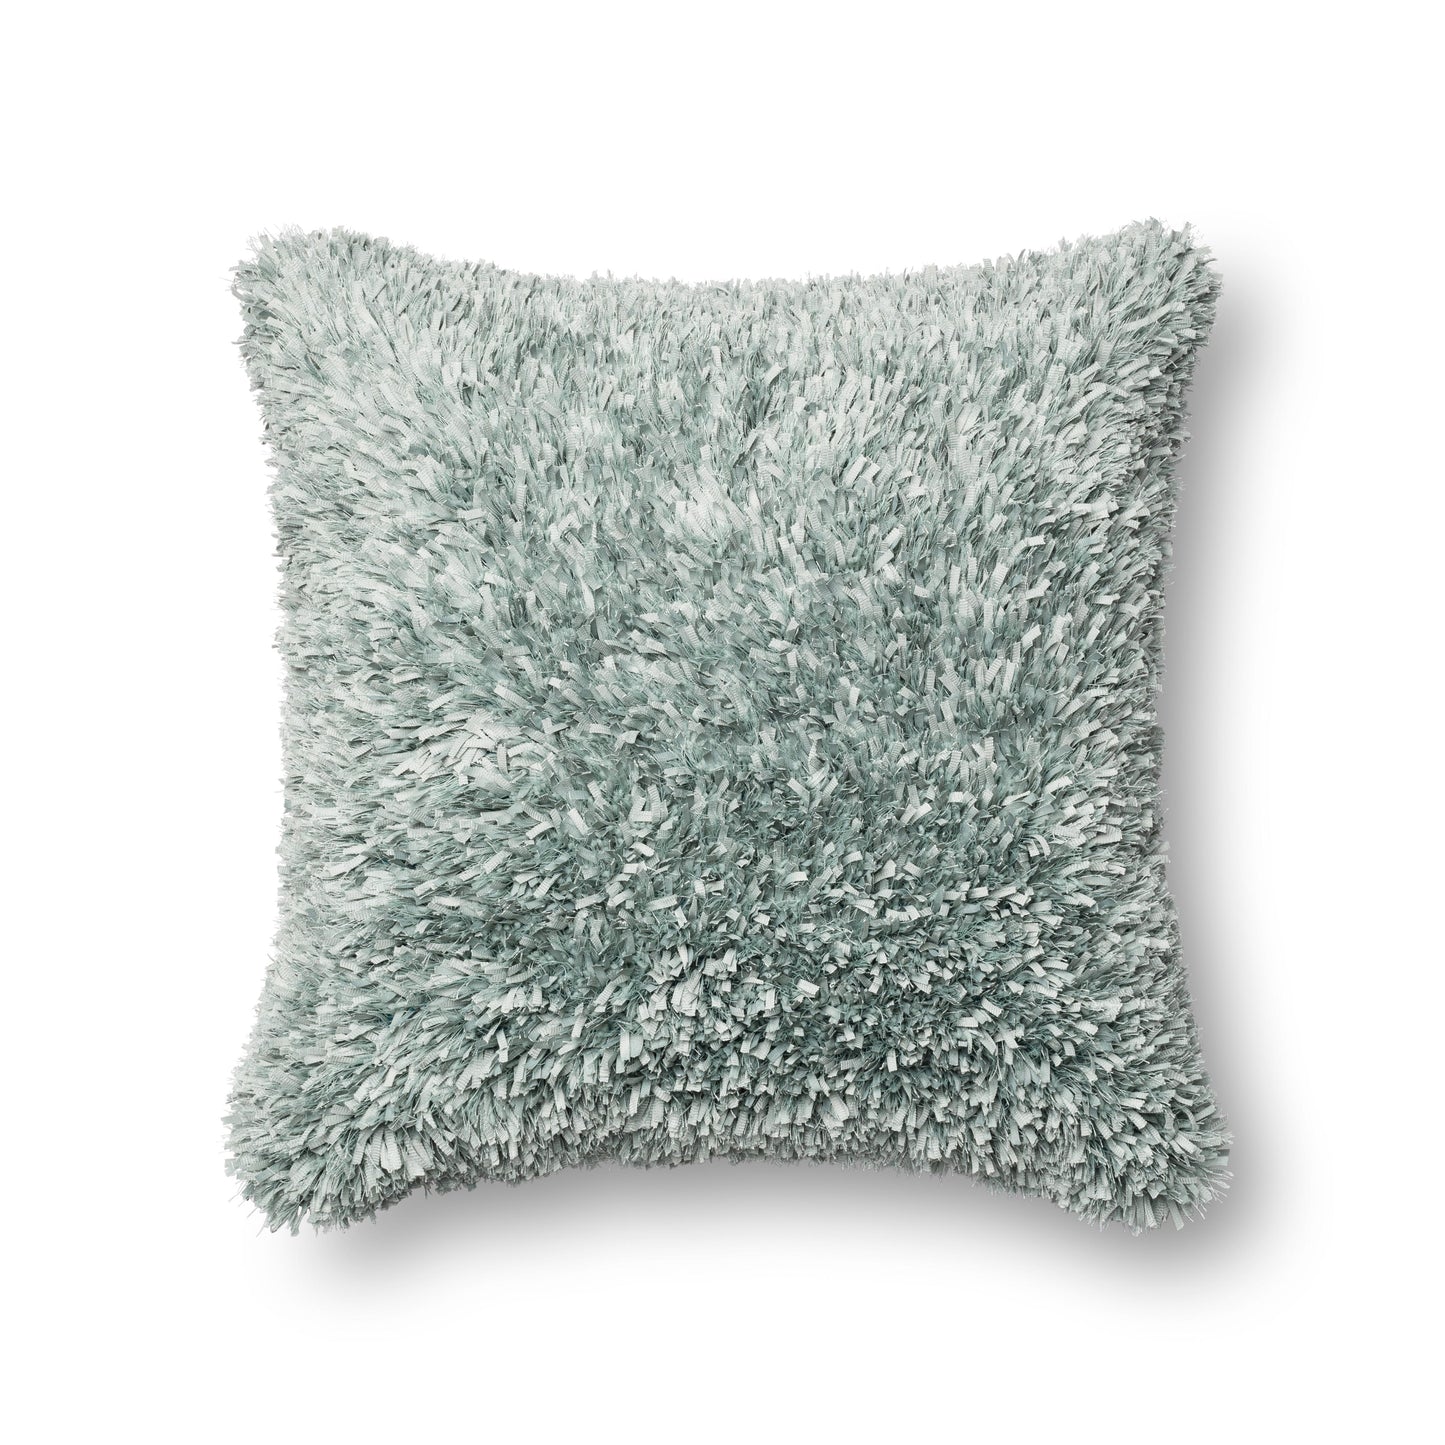 PILLOWS P0045 Synthetic Blend Indoor Pillow from Loloi